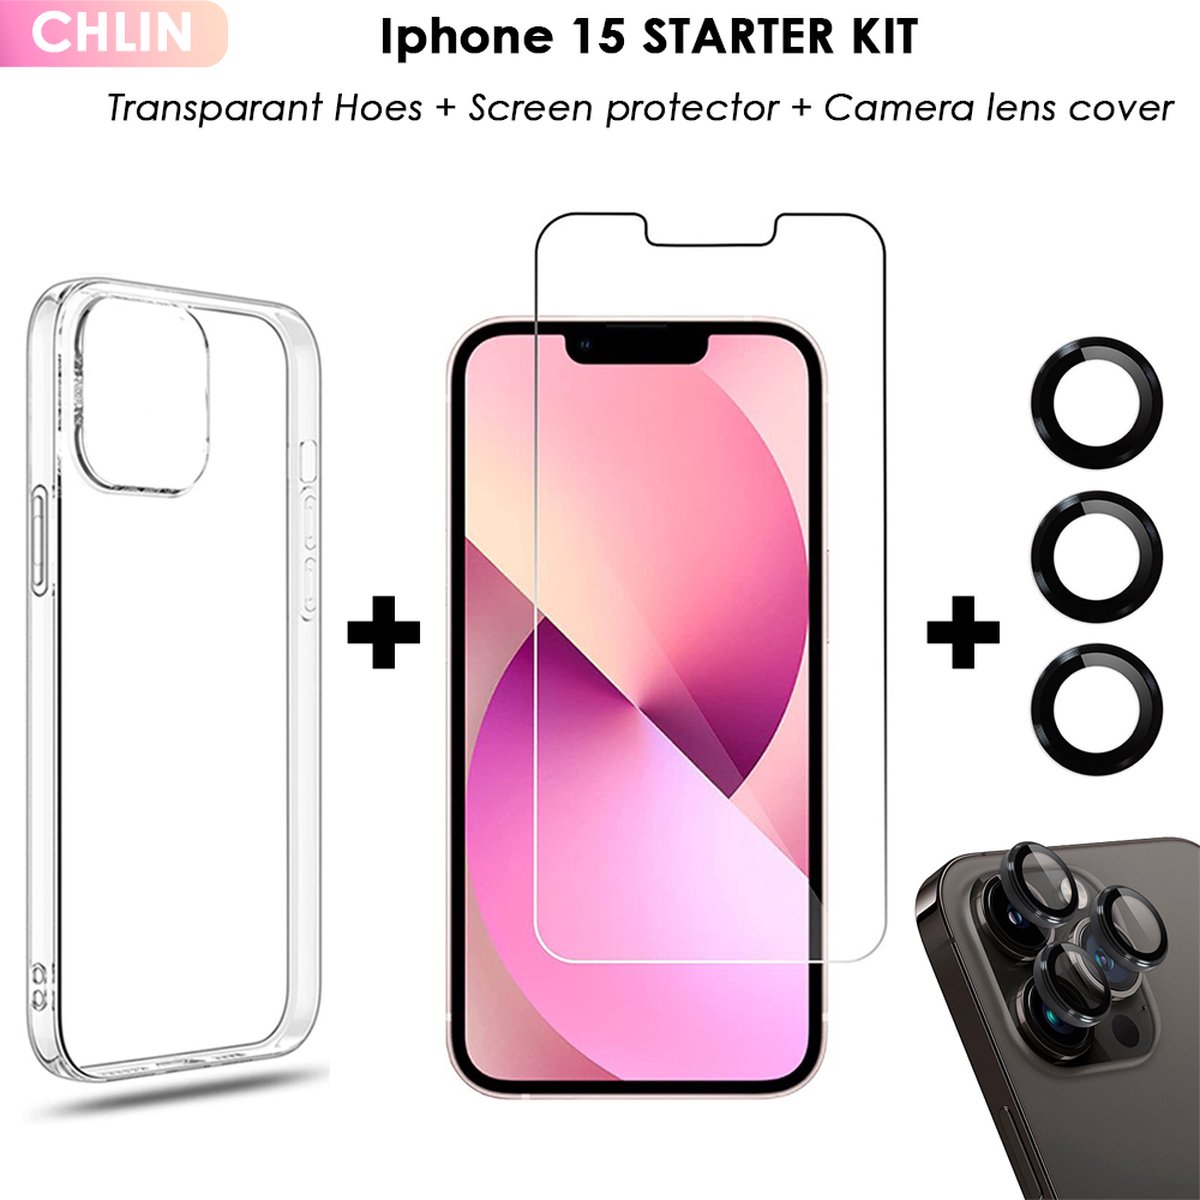 CL CHLIN® - Iphone 15 Starter Kit (hoesje + screen protector + camera lens case) - Iphone 15 screen protector - Iphone 15 transprarant Hoesje - Iphone 15 case - Iphone 15 camera lens protector